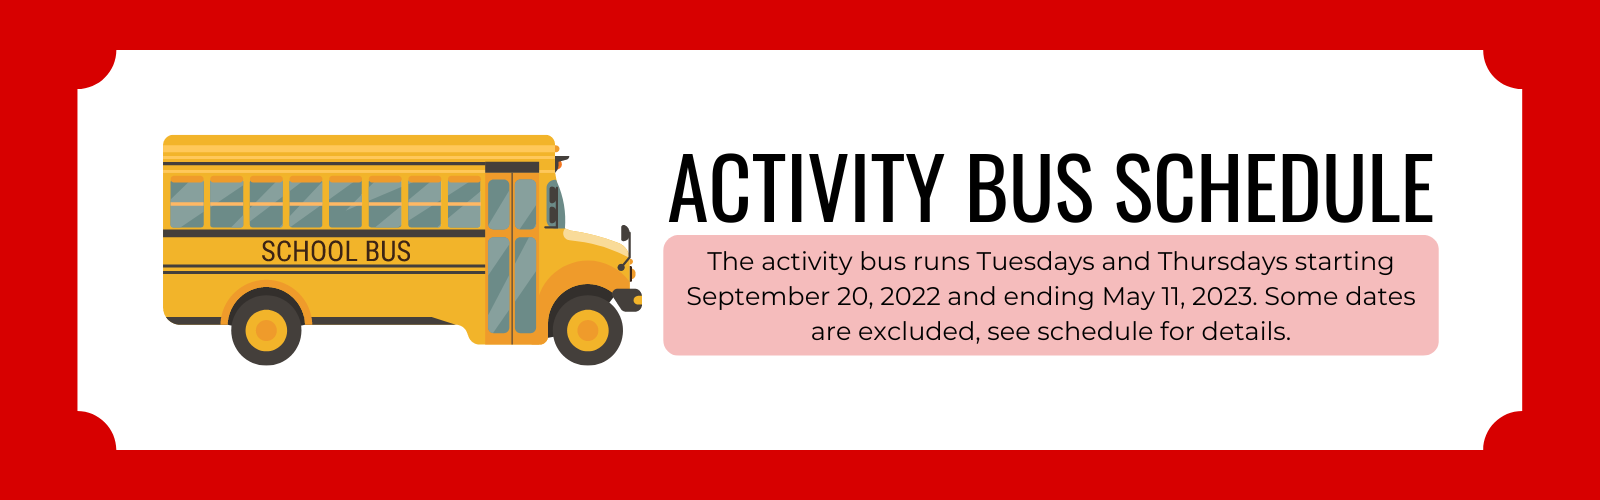 Activity Bus Schedule. The activity bus runs Tuesdays and Thursdays starting September 20, 2022 and ending May 11, 2023. Some dates are excluded, see schedule for details.